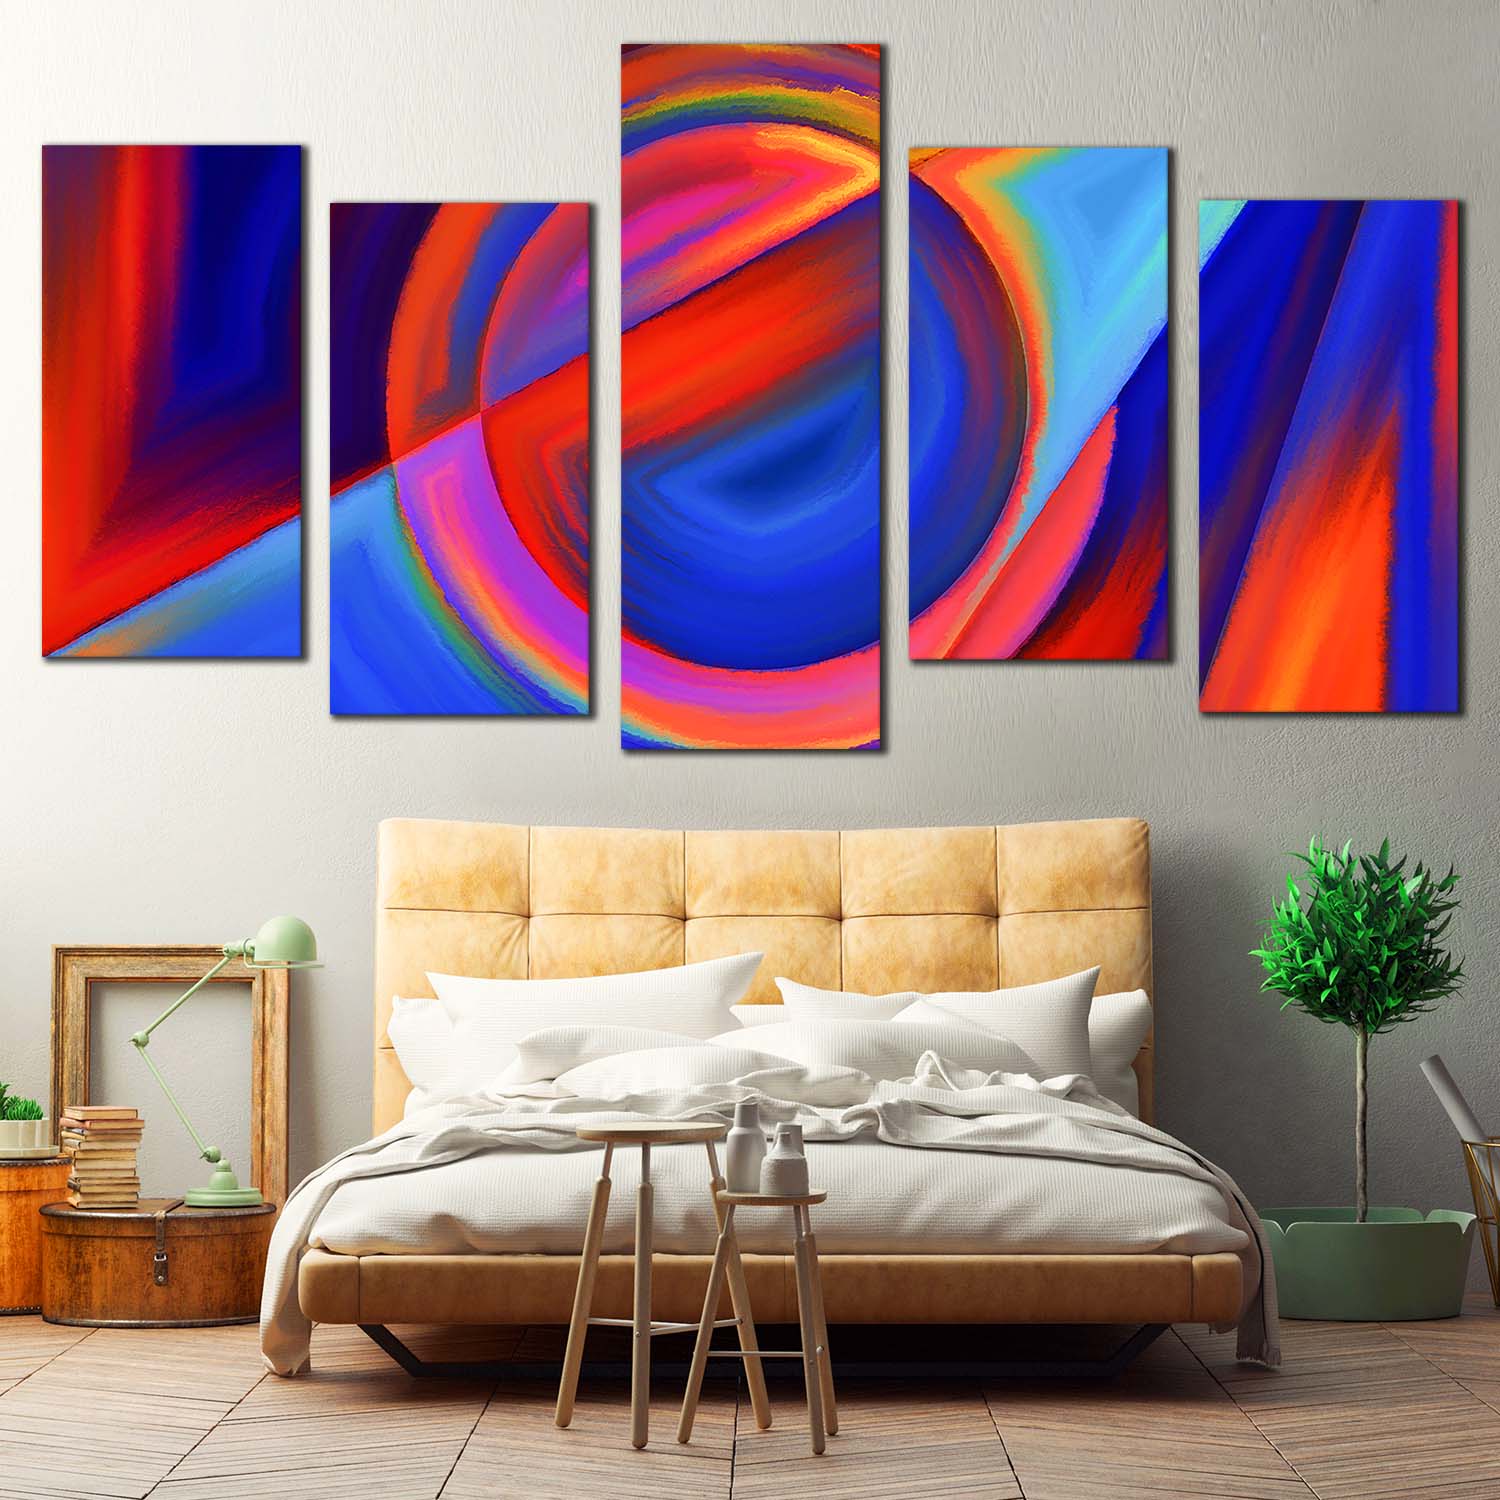 Modern Abstract Canvas Wall Art, Blue Red Abstract Forms 5 Piece Multi ...